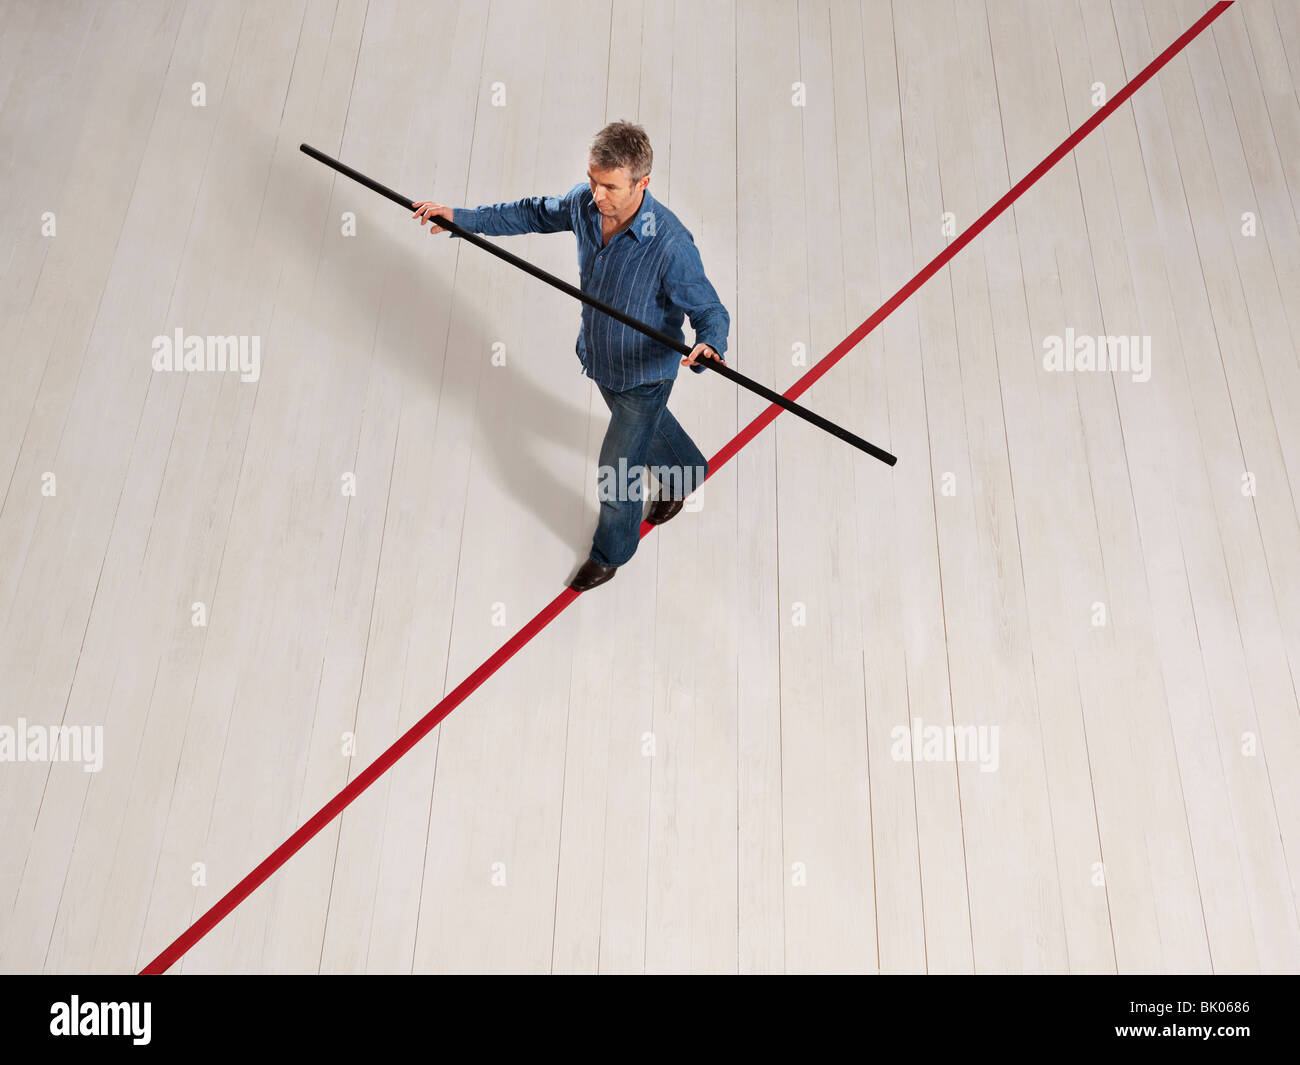 Man balancing on thin red line with pole Stock Photo